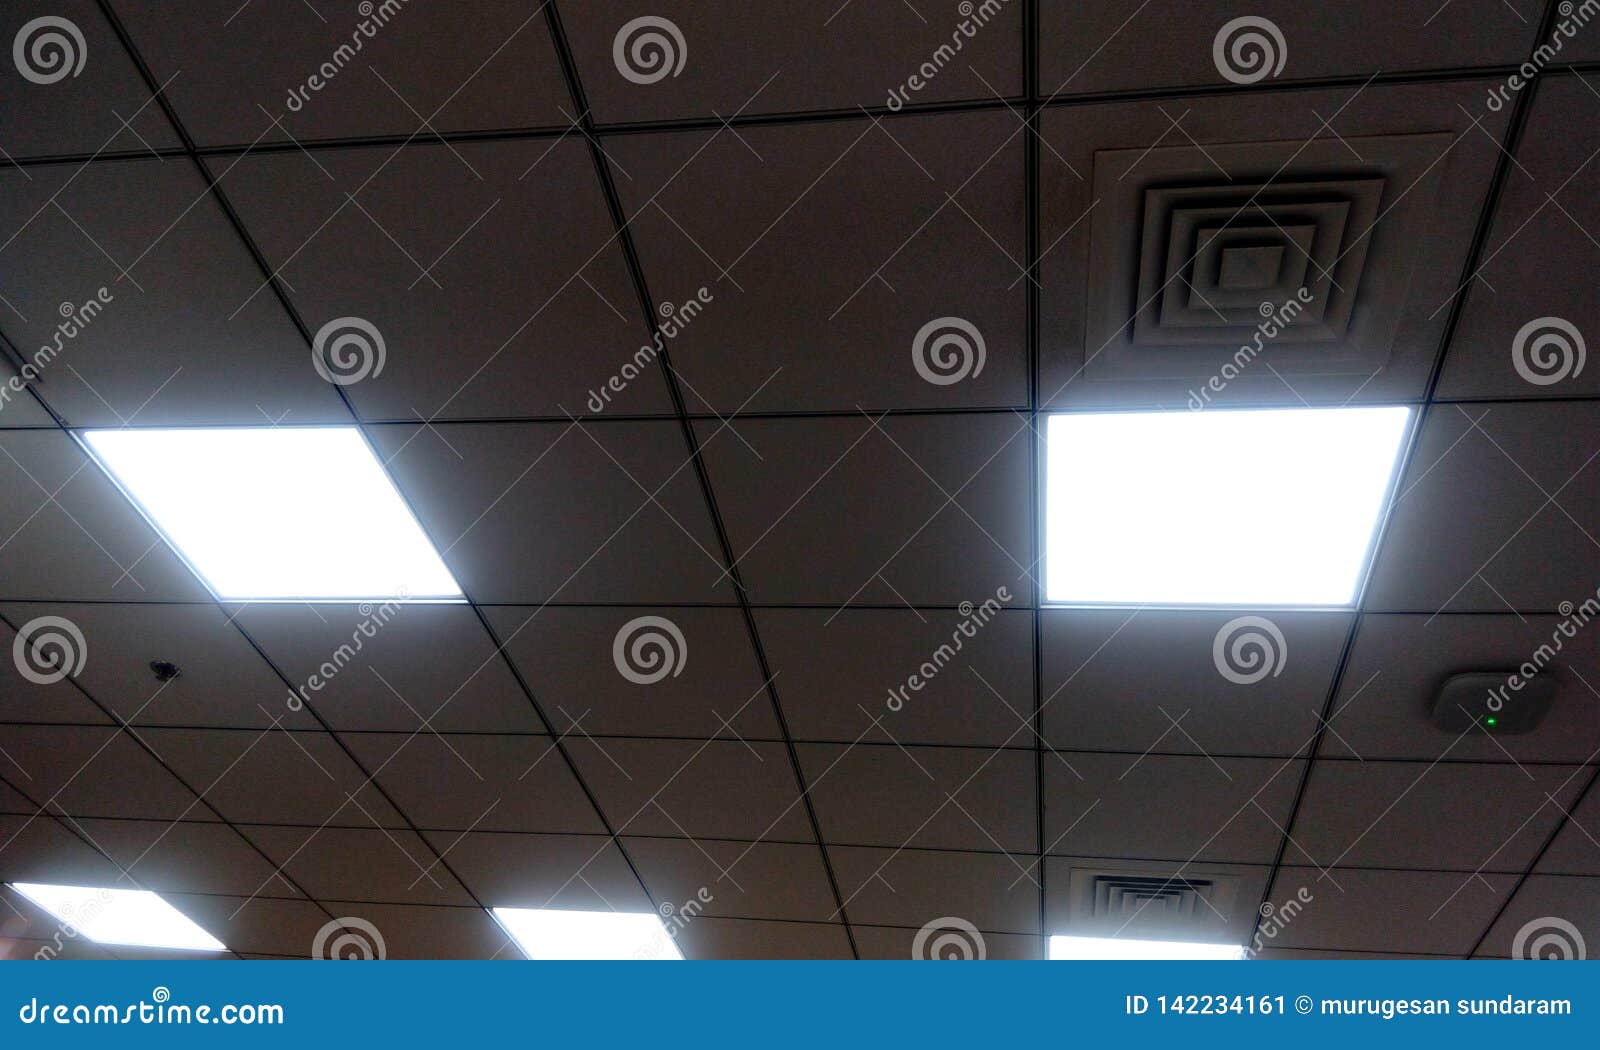 Grid Type False Ceiling In Office Building Stock Image